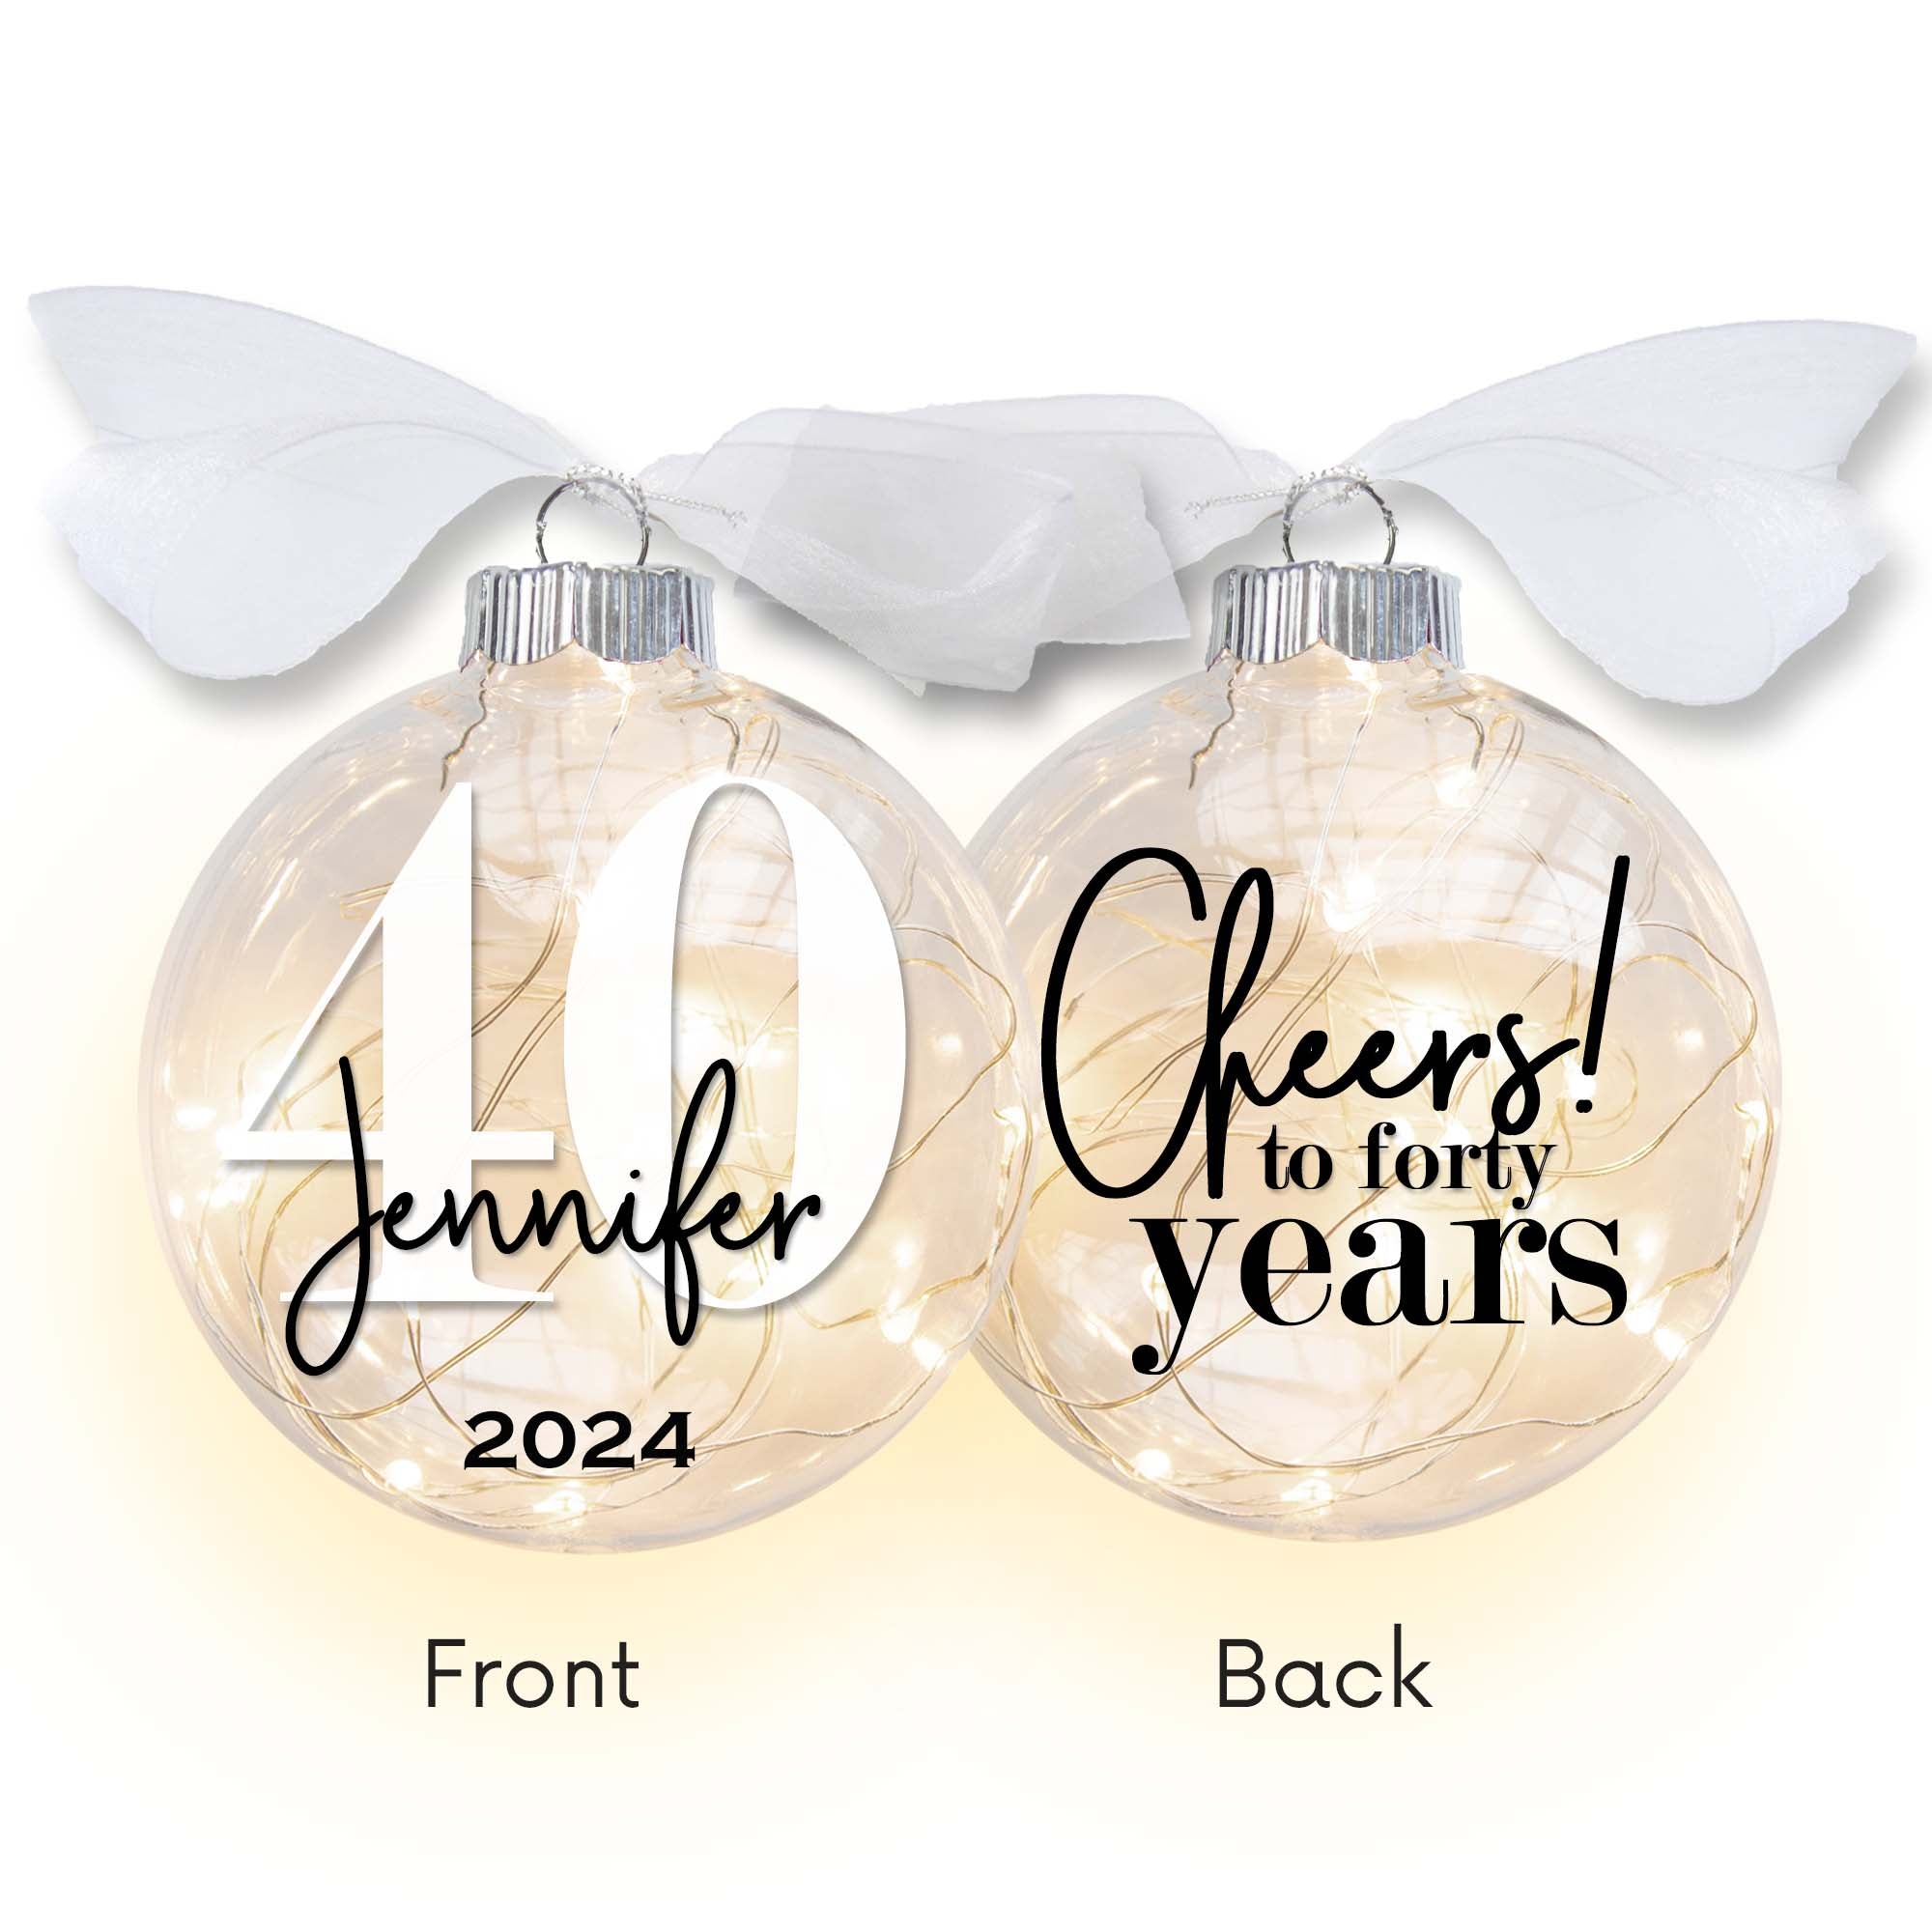 Personalized 40th birthday light up Christmas ornament - Cheers to forty years